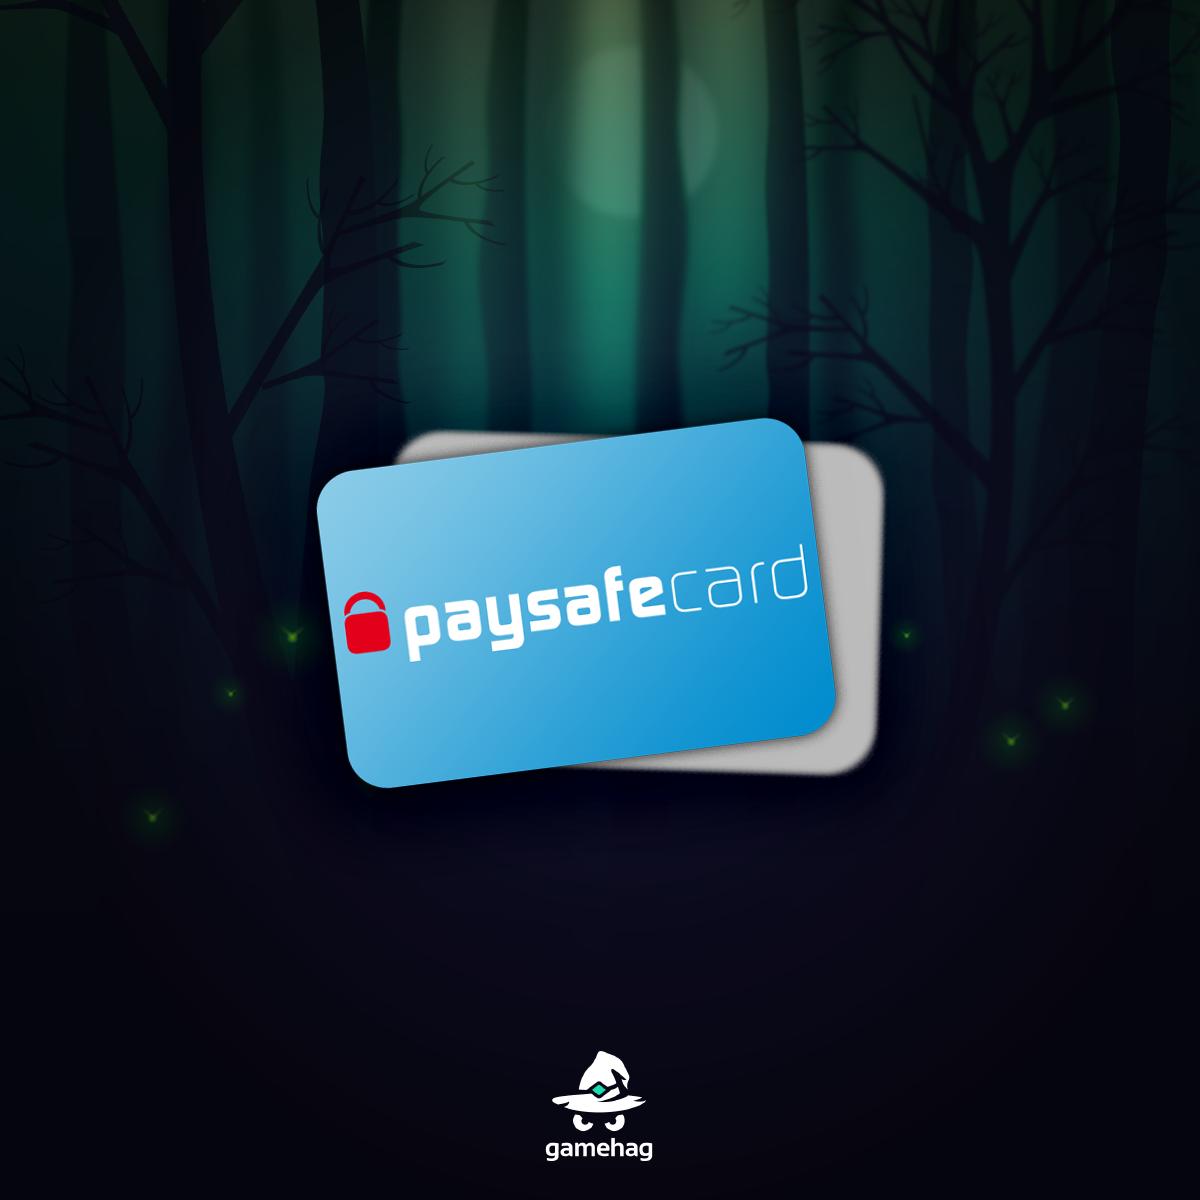 Gamehag On Twitter Did You Know That You Can Receive Paysafecard